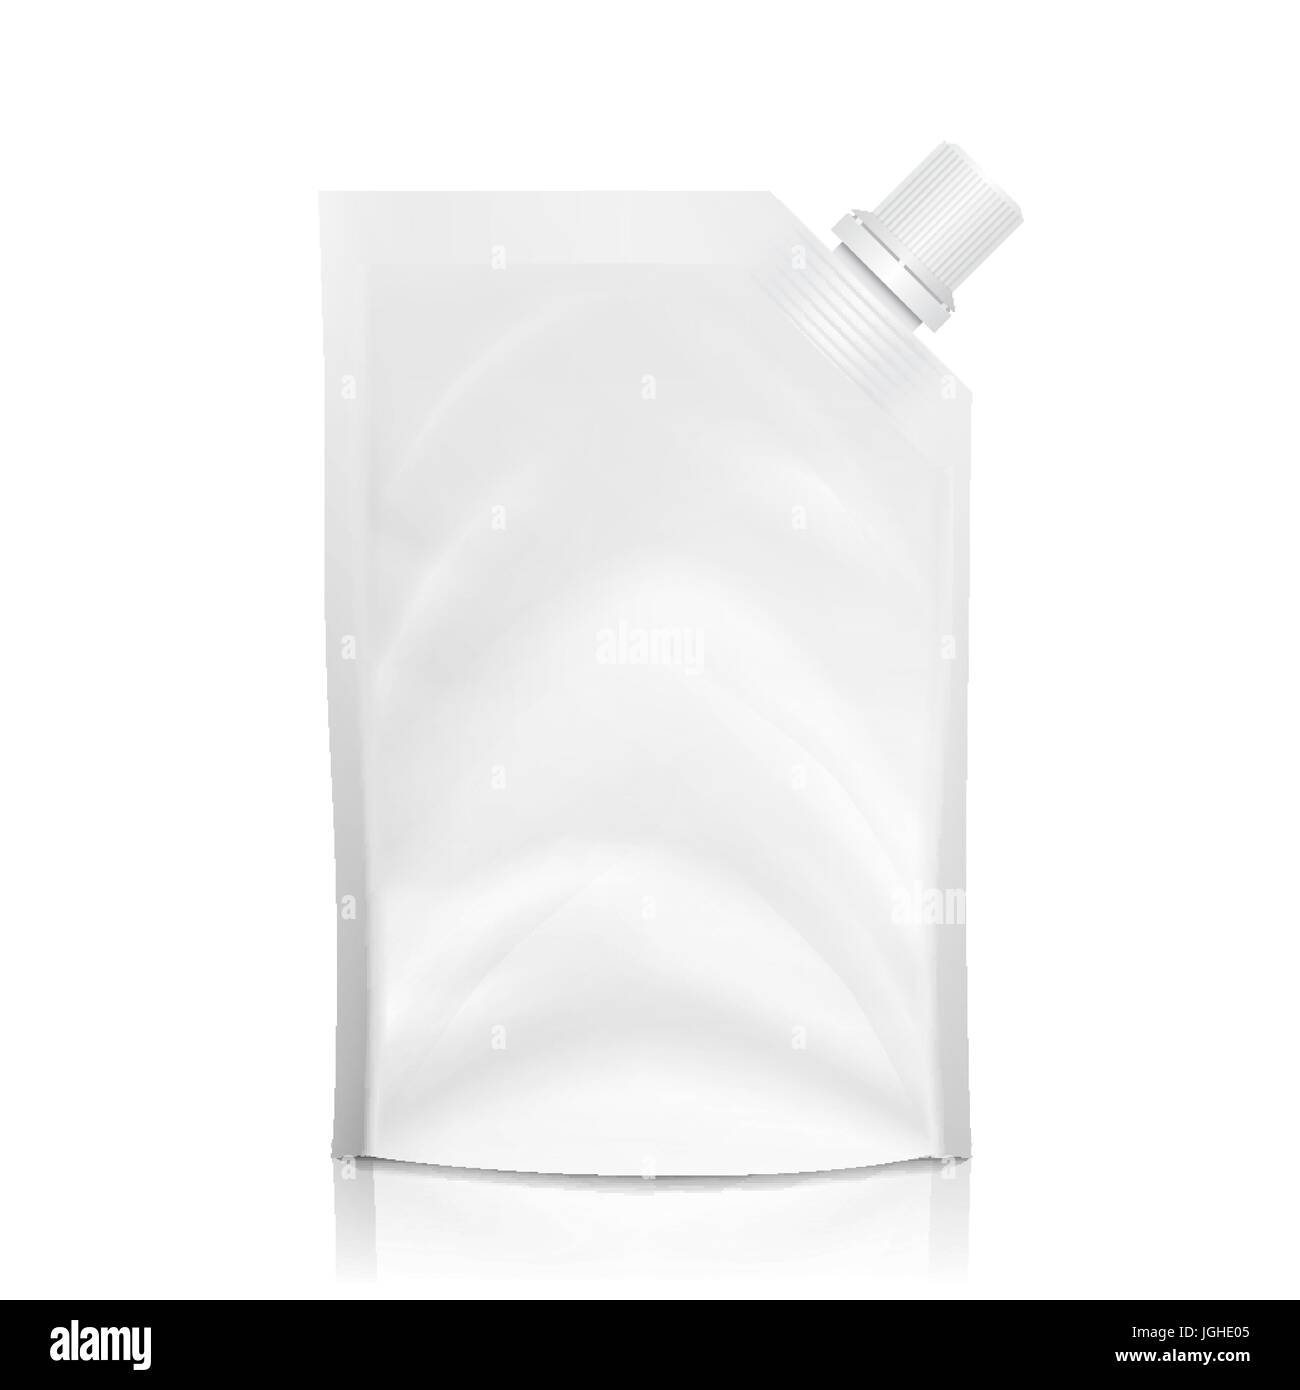 Doy-pack Blank Vector. White Clean Doypack Bag Packaging With Corner Spout Lid. Plastic Spouted Pouch Template Stock Vector